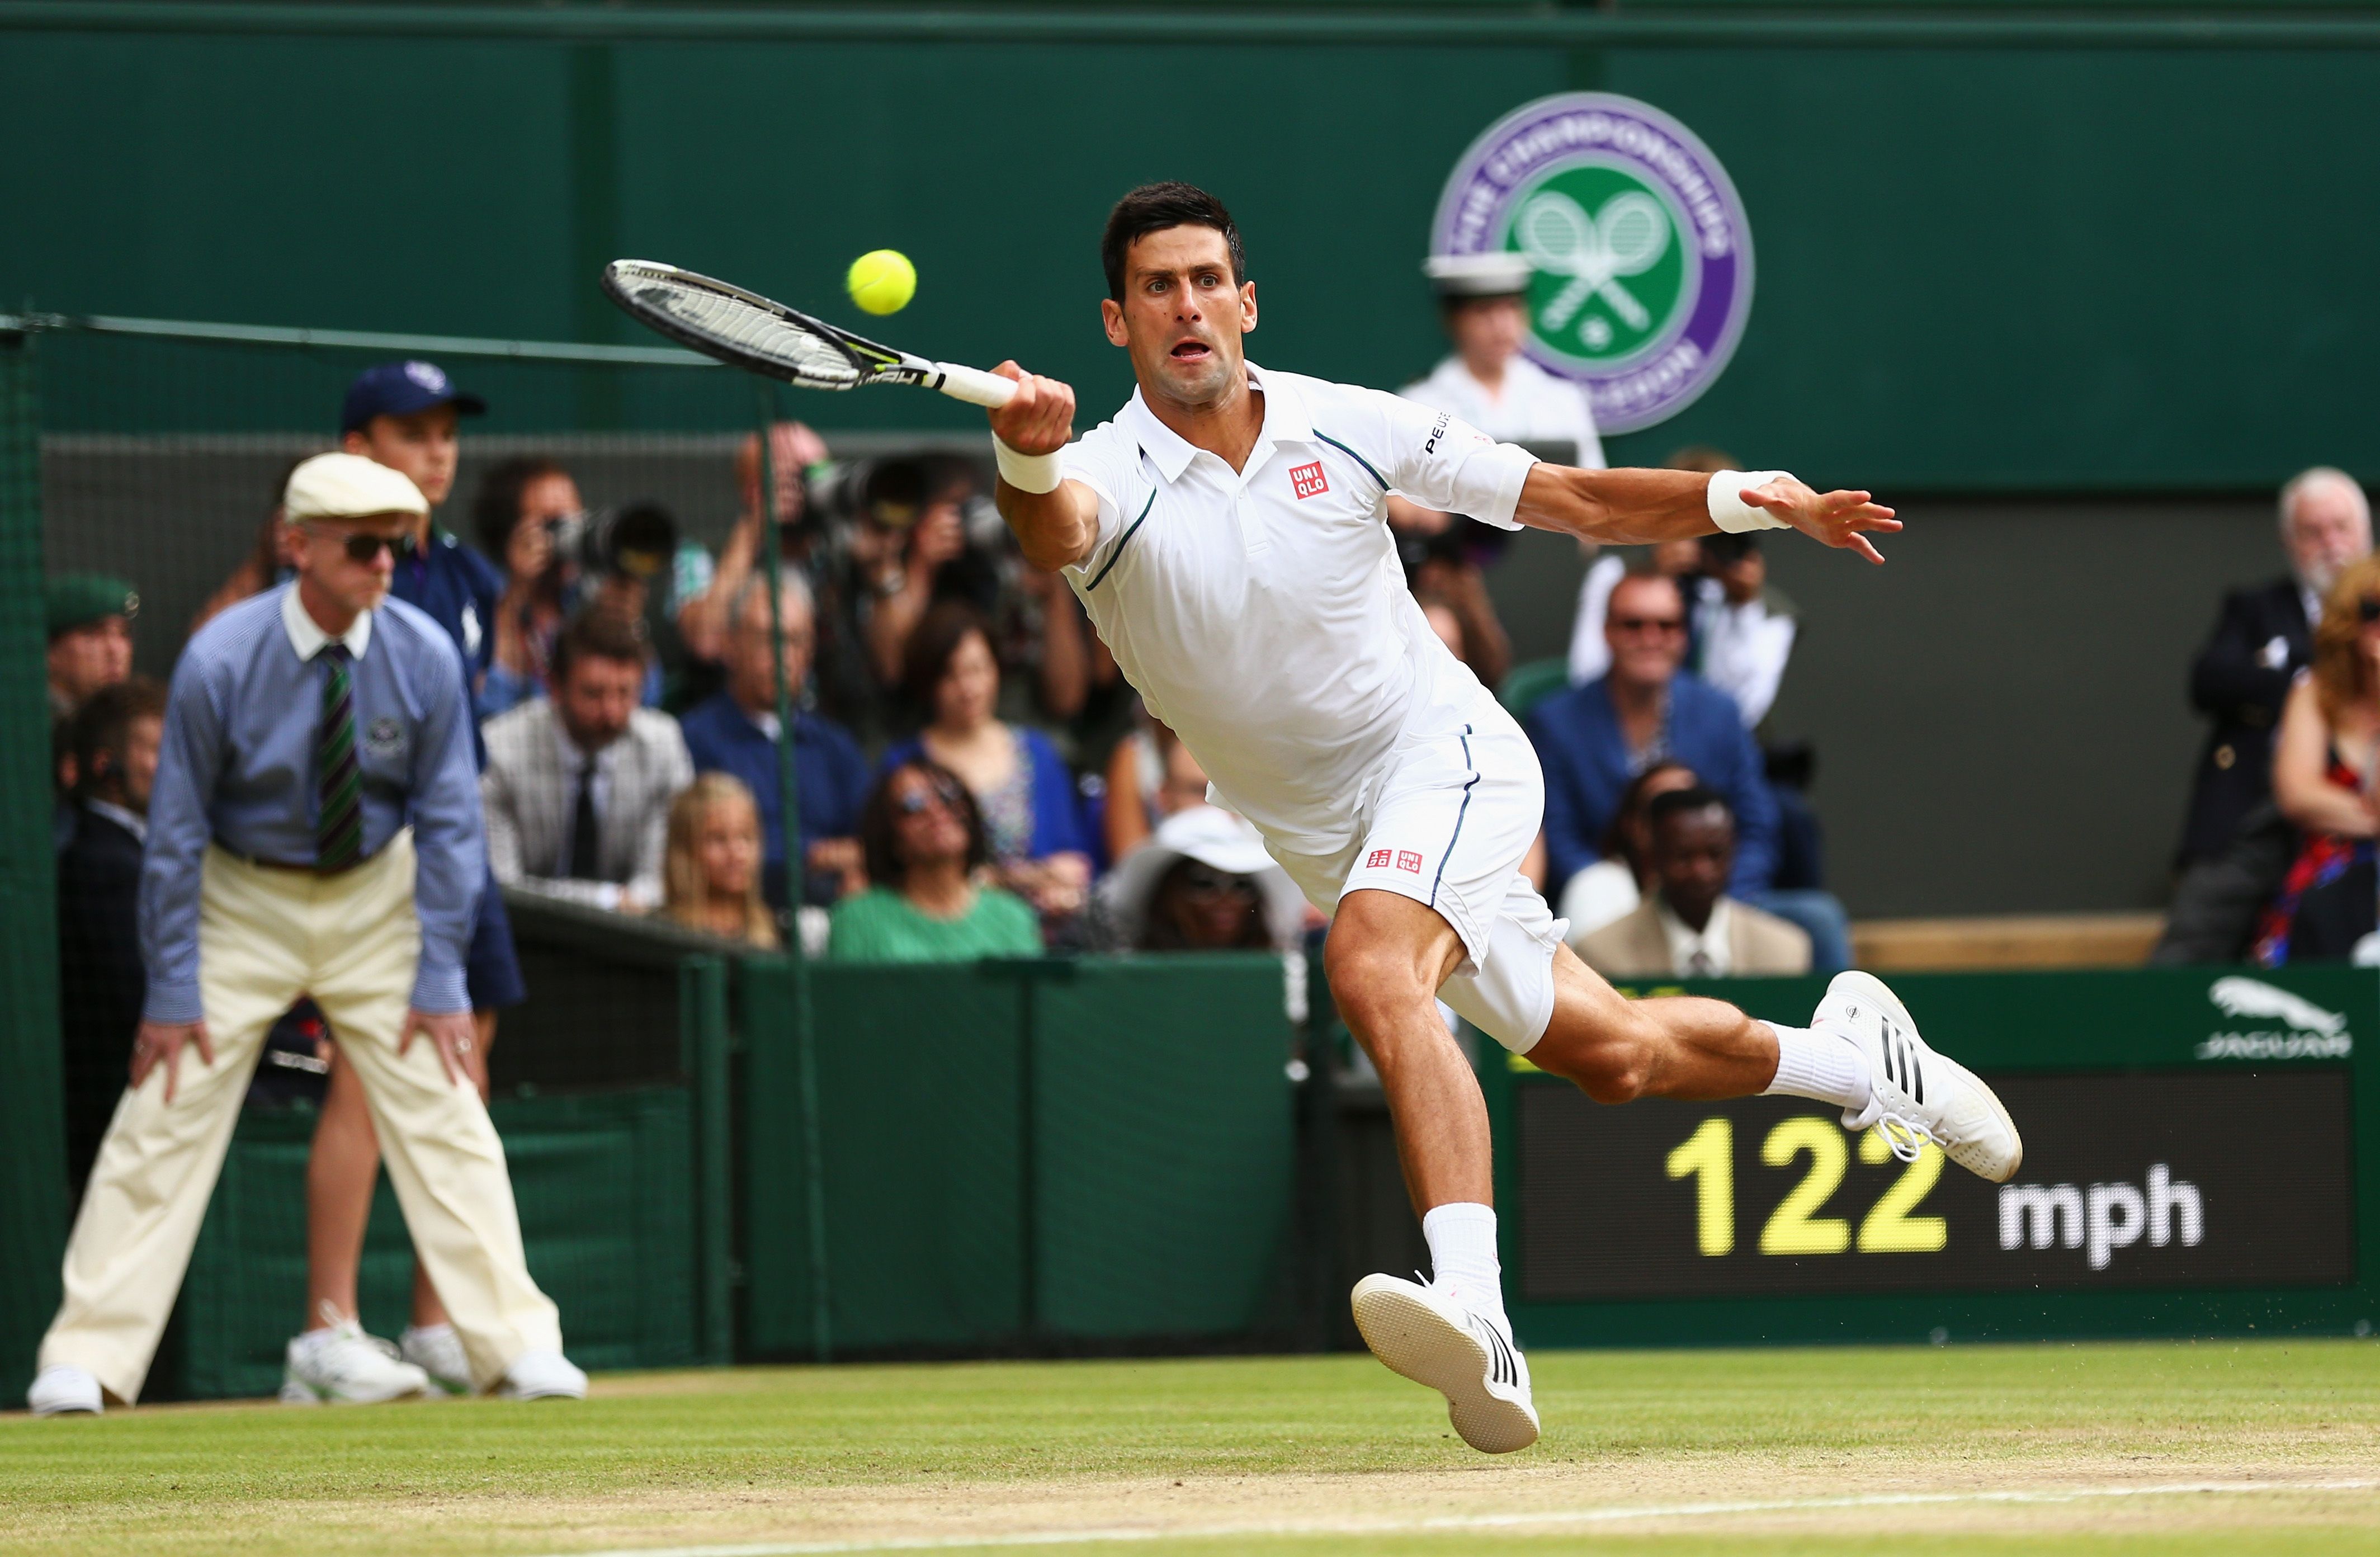 LONDON, ENGLAND - JULY 12: Novak Djokovic of Serbia plays a forehand in the Final of The Gentlemen's Singles against Roger Federer of Switzerland on day thirteen of the Wimbledon Lawn Tennis Championships at the All England Lawn Tennis and Croquet Club on July 12, 2015 in London, England. (Photo by Clive Brunskill/Getty Images)